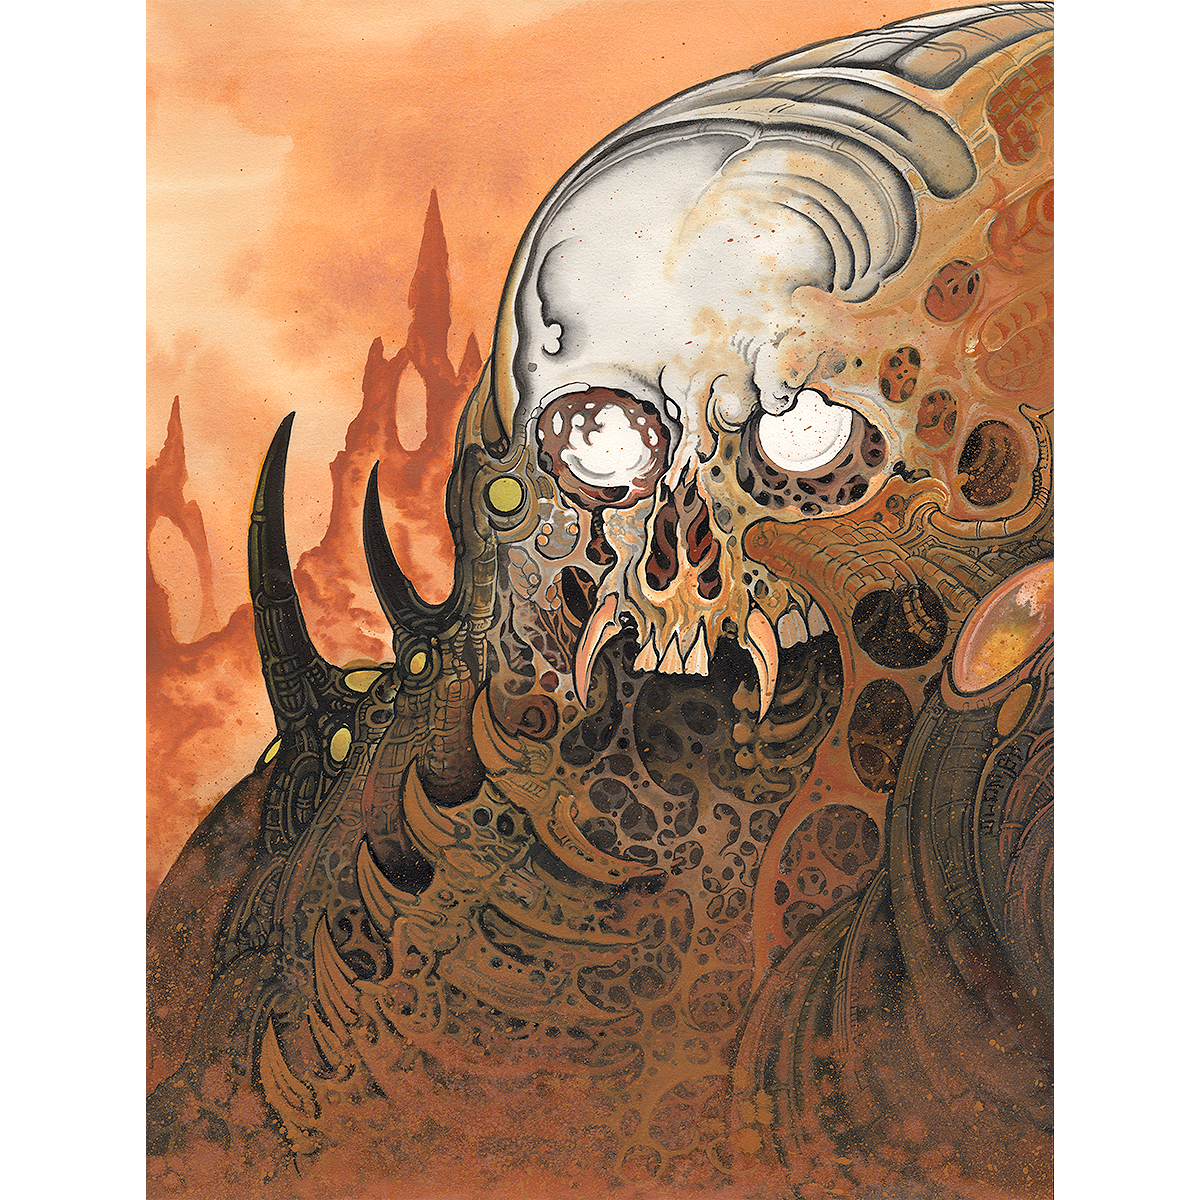 Keenan Bouchard "The Dust Of This Planet" Giclee Print